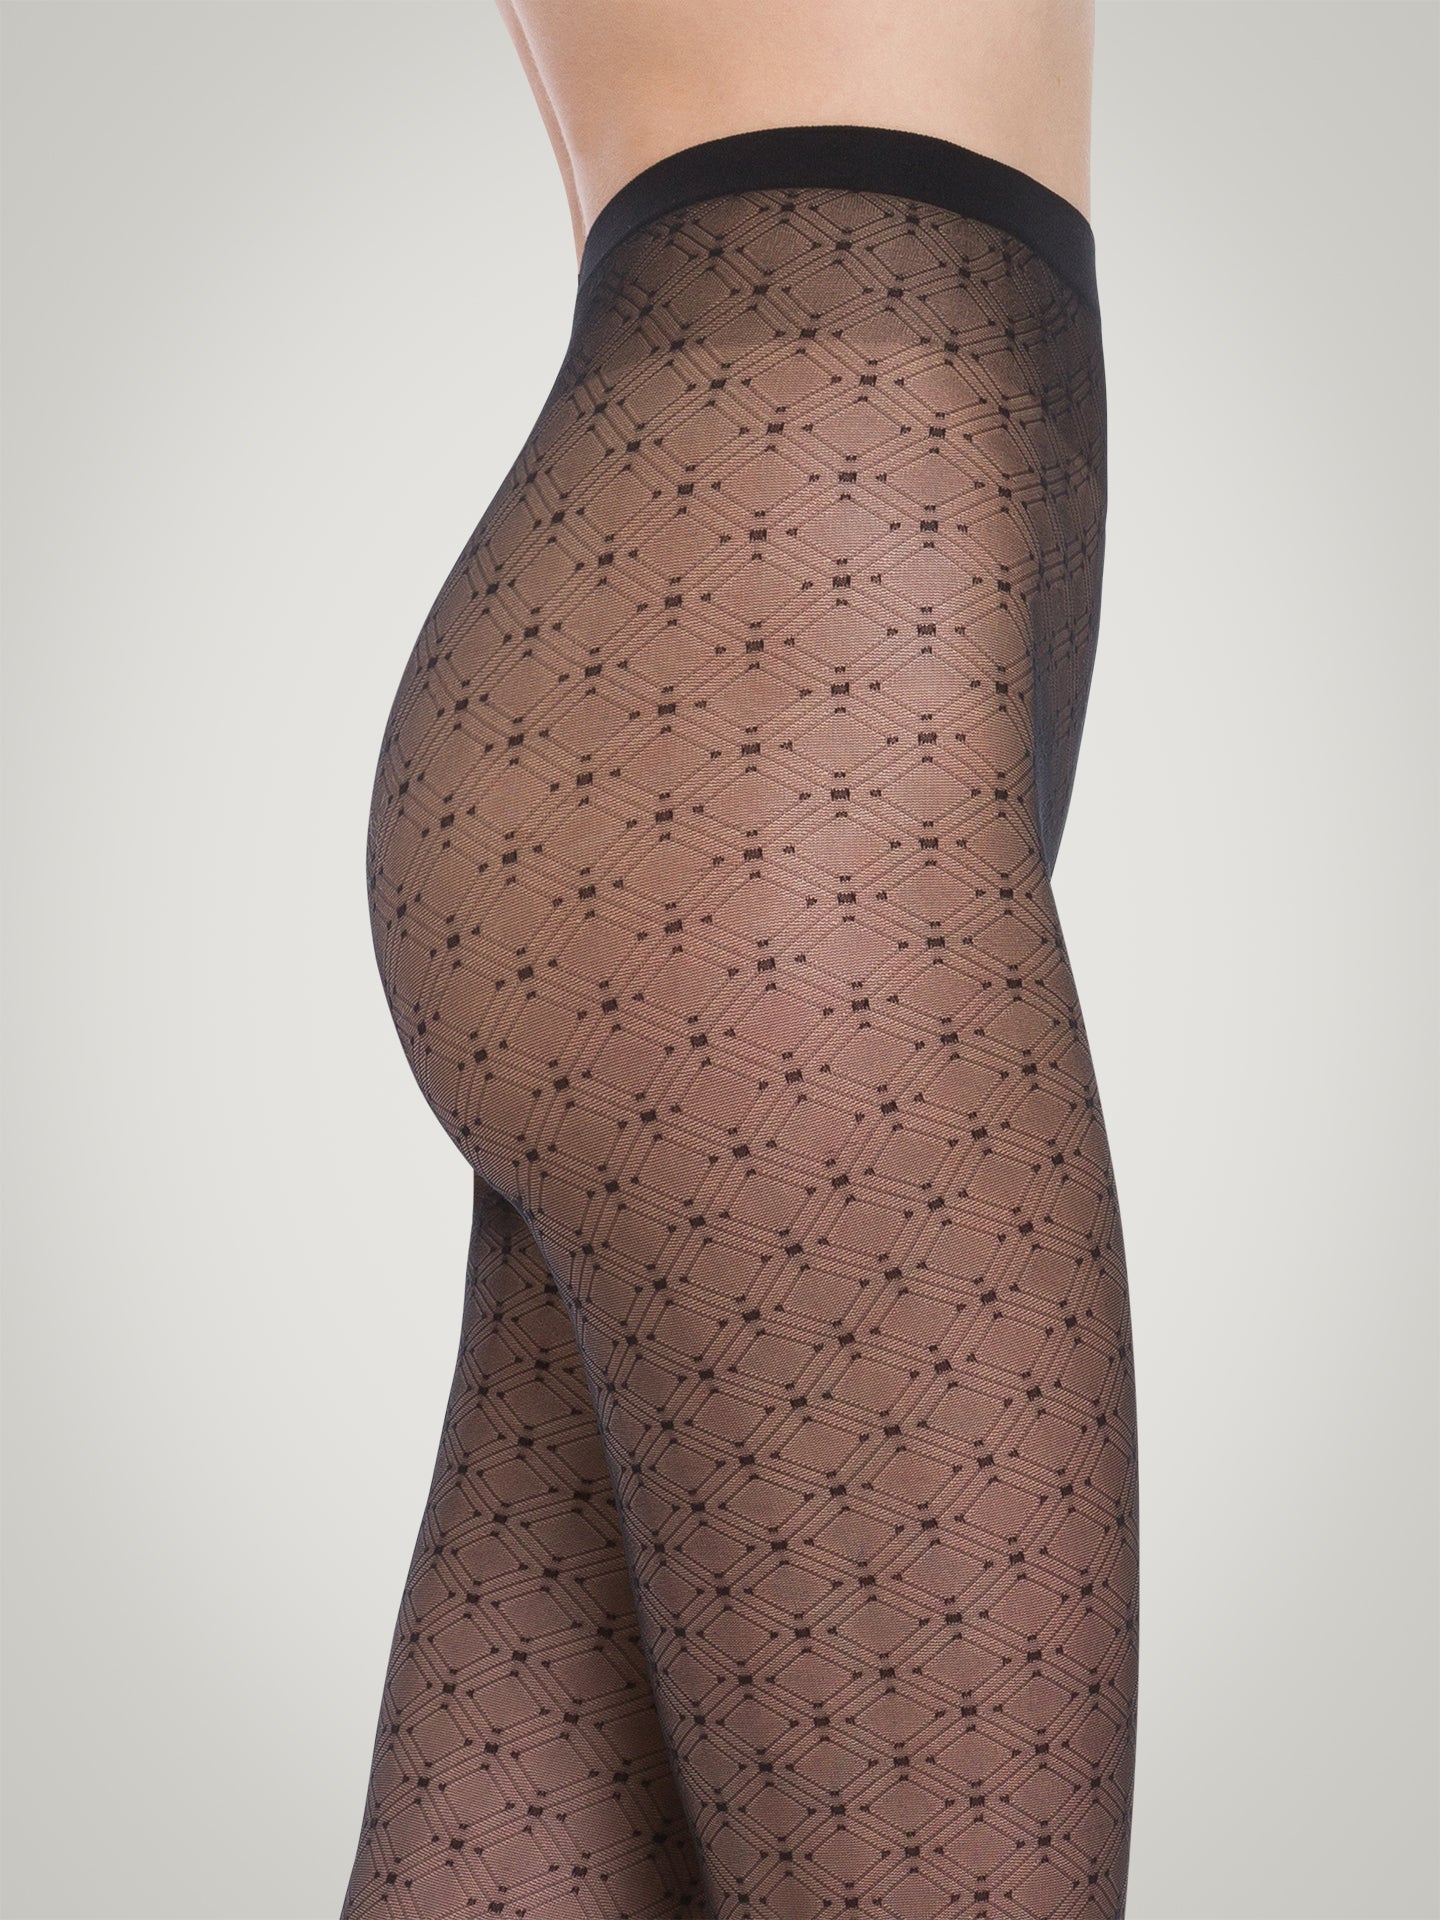 Wolford OUTLET, Diamond Net Tights im SALE